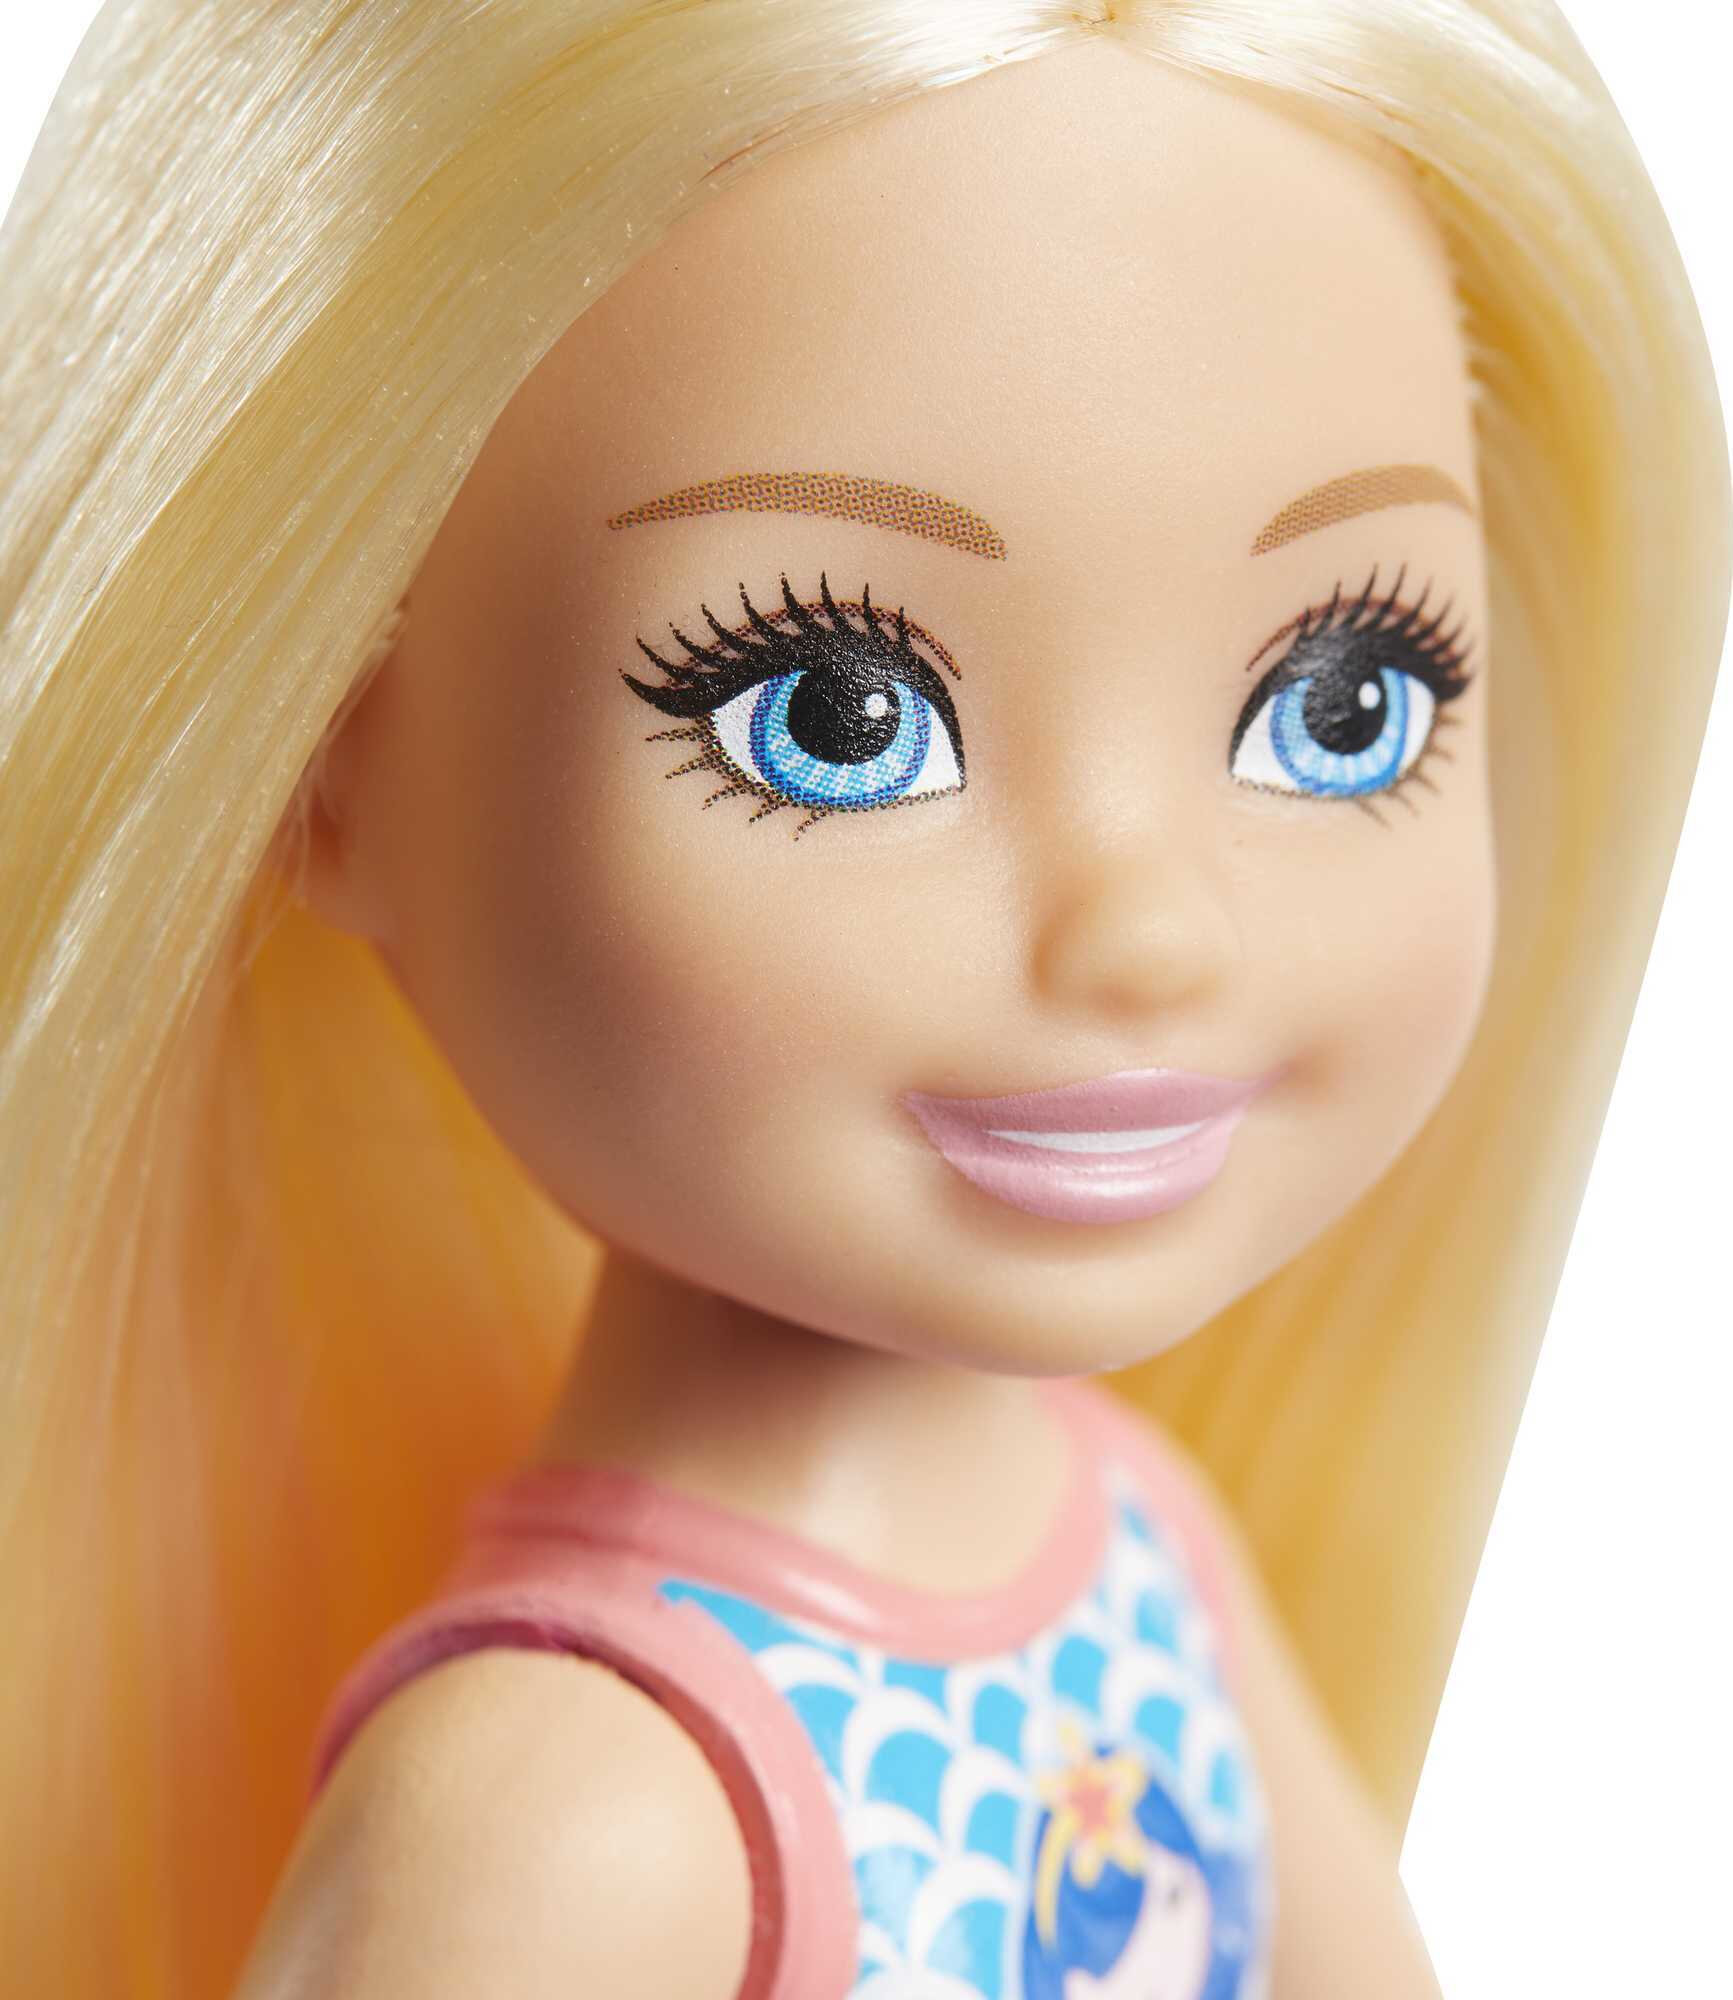 Barbie Club Chelsea Doll, Small Doll with Long Blonde Hair, Blue Eyes & Mermaid-Graphic Swimsuit - image 2 of 5